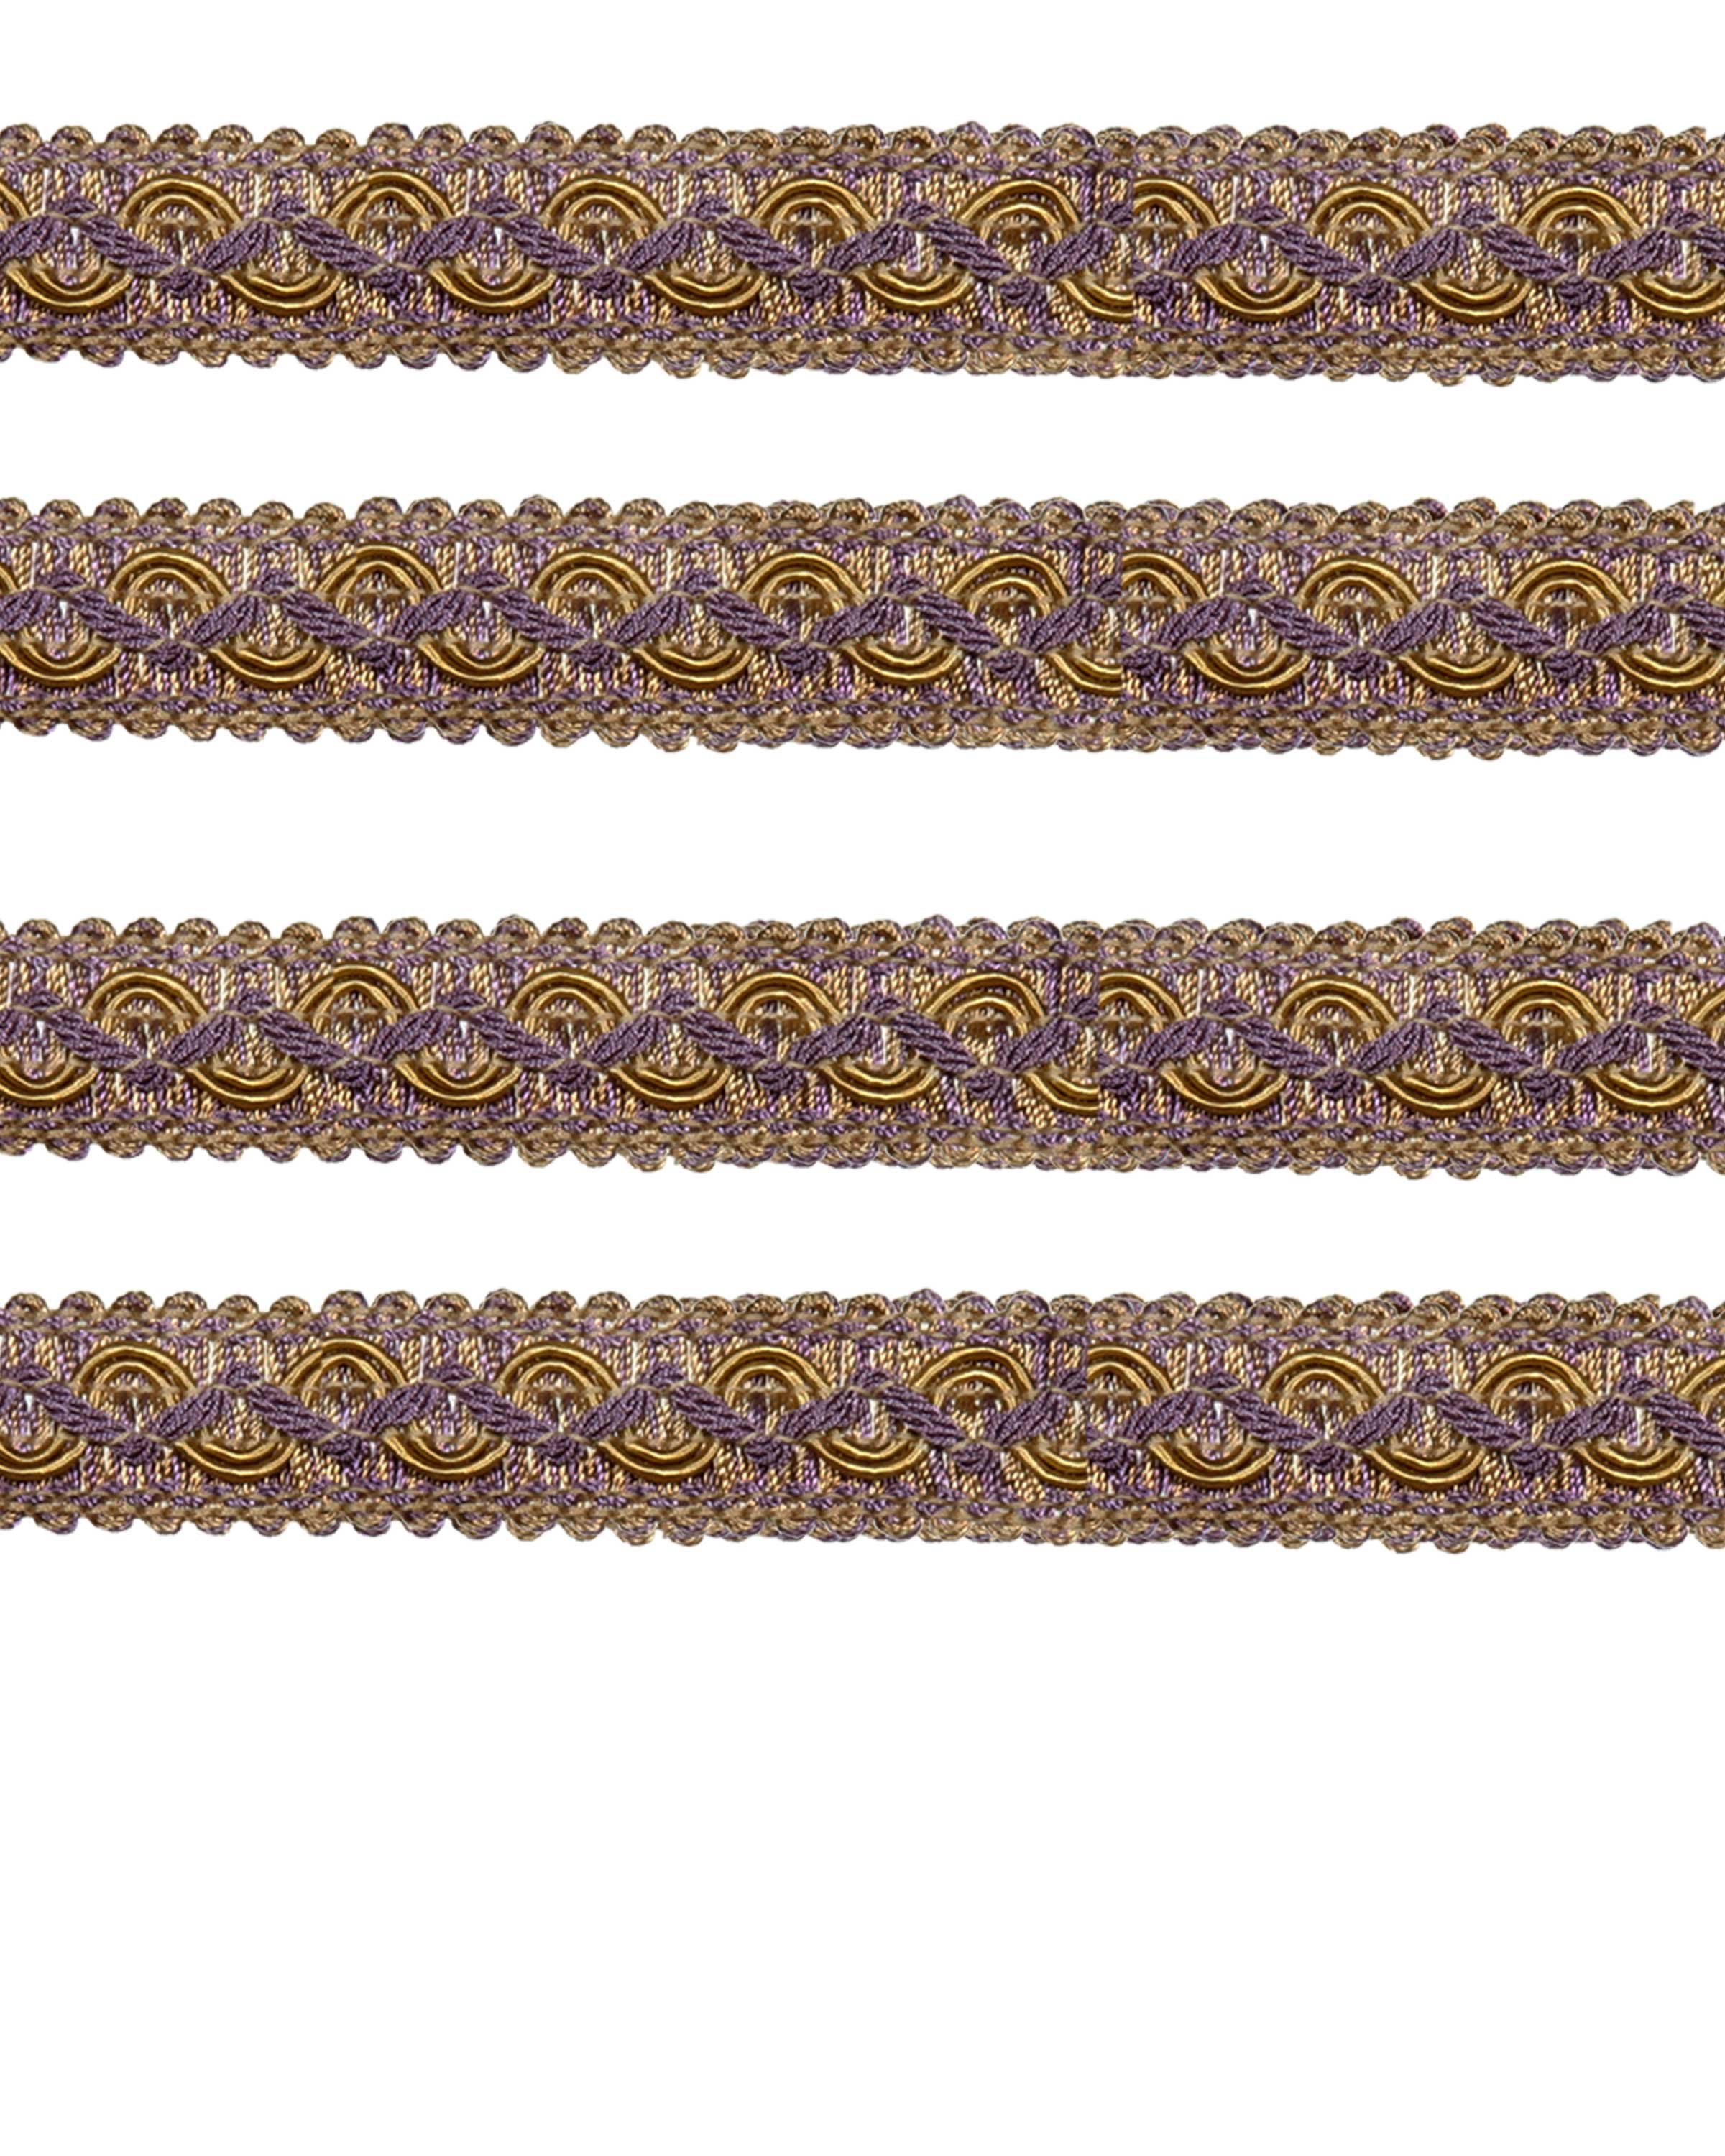 Ornate Braid - Purple / Gold 20mm Price is for 5 metres